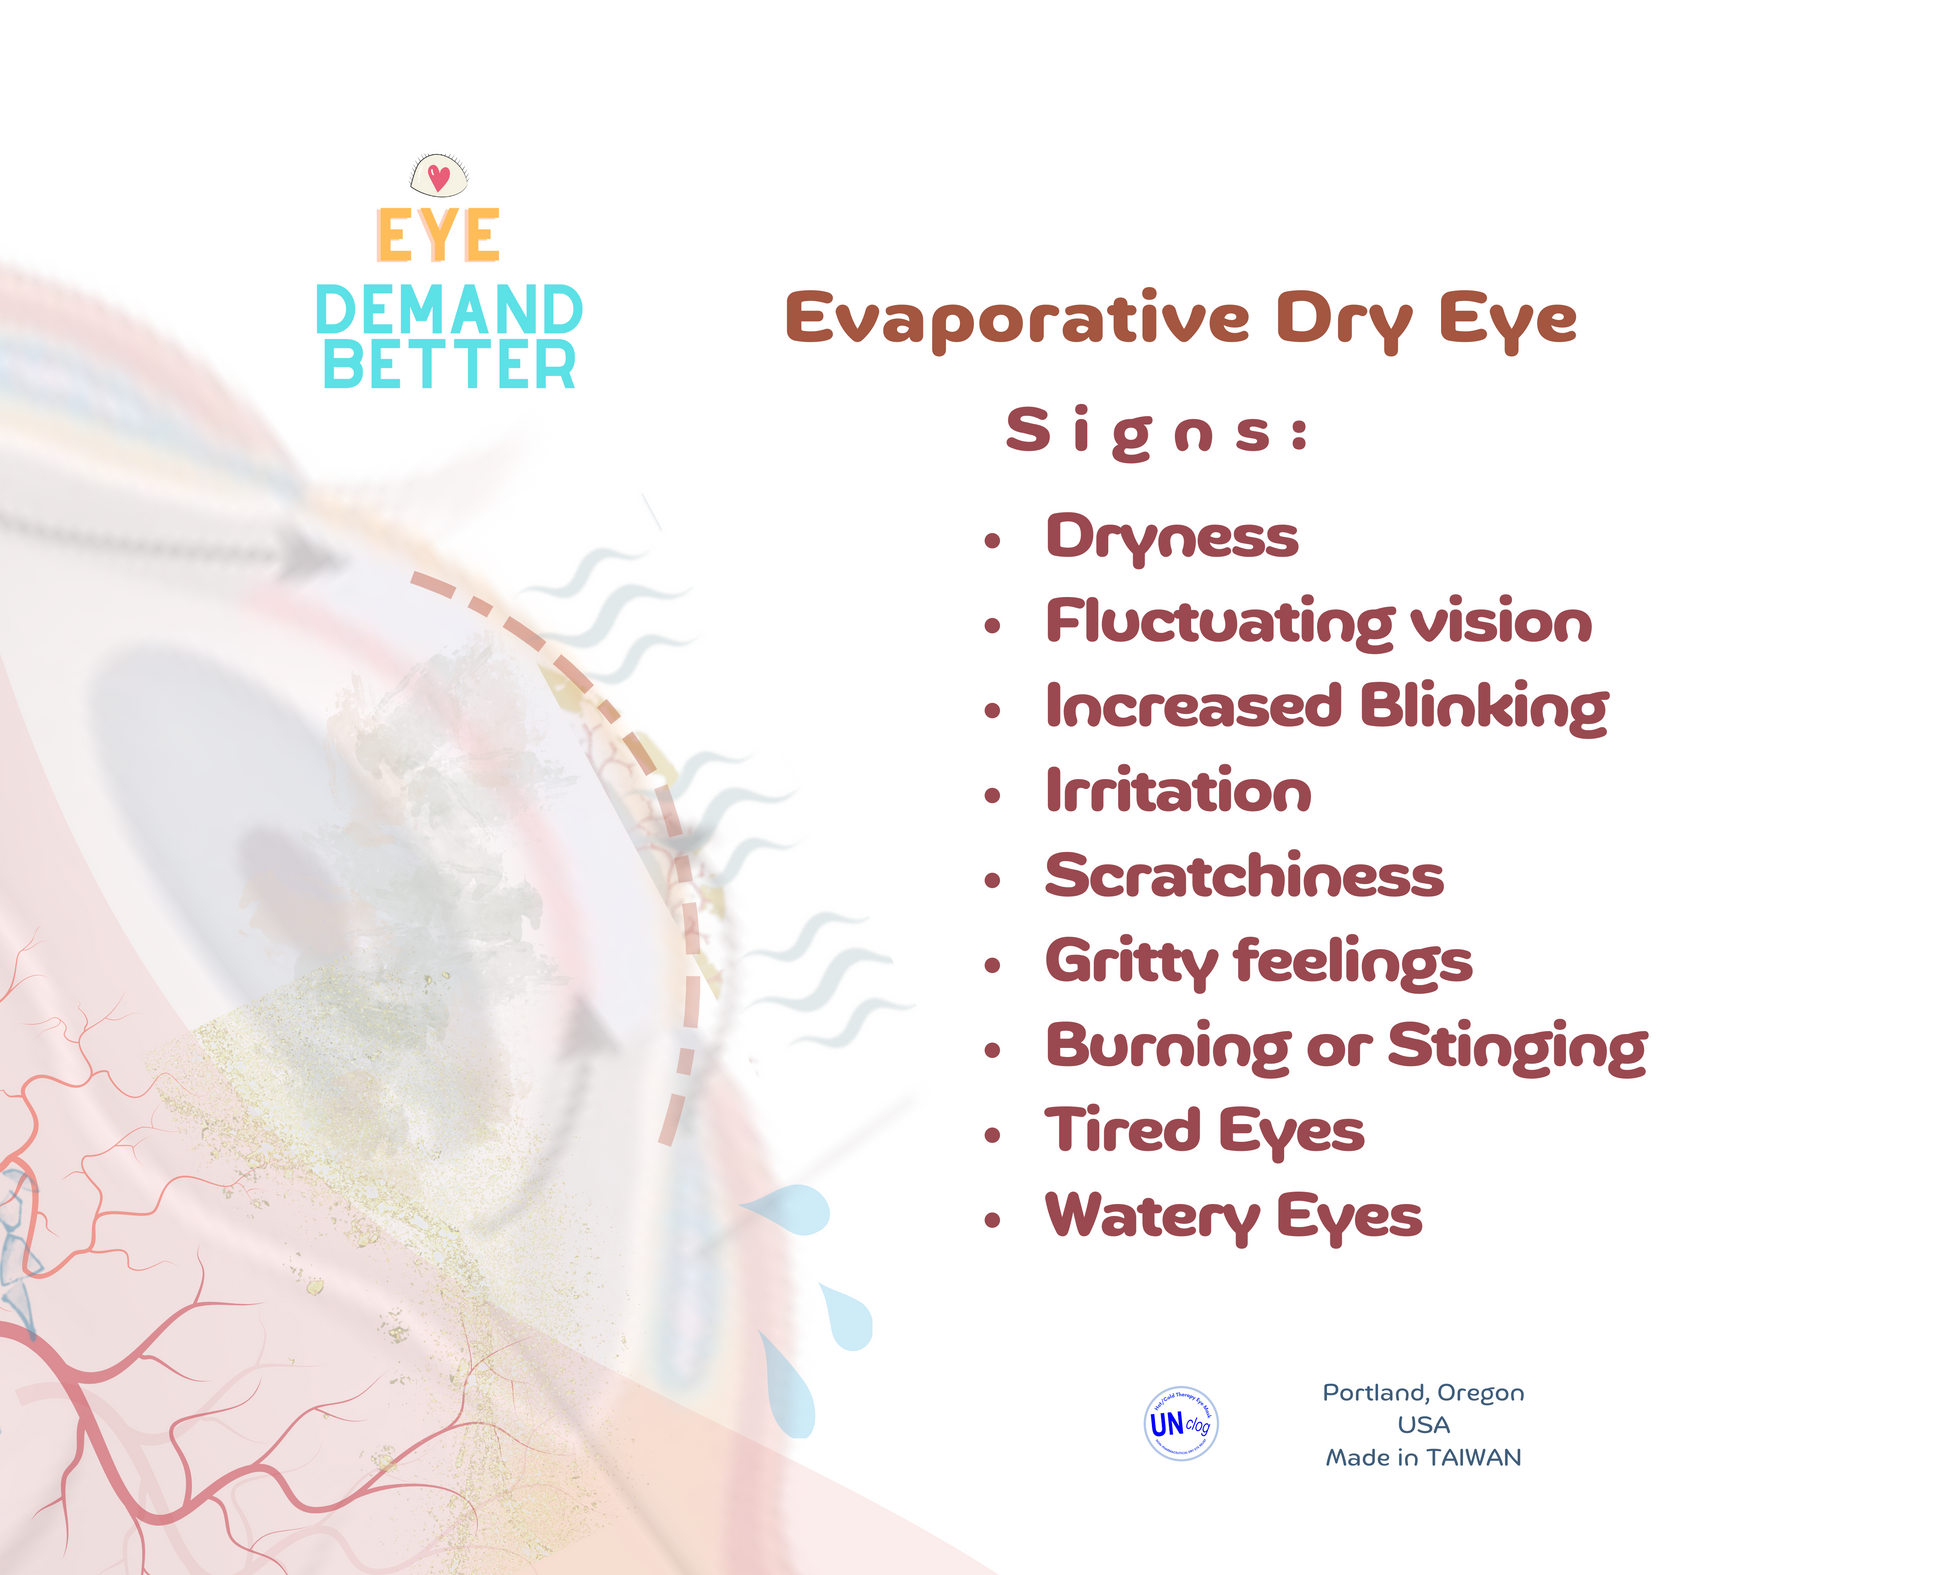 These are the signs of evaporation dry eye.